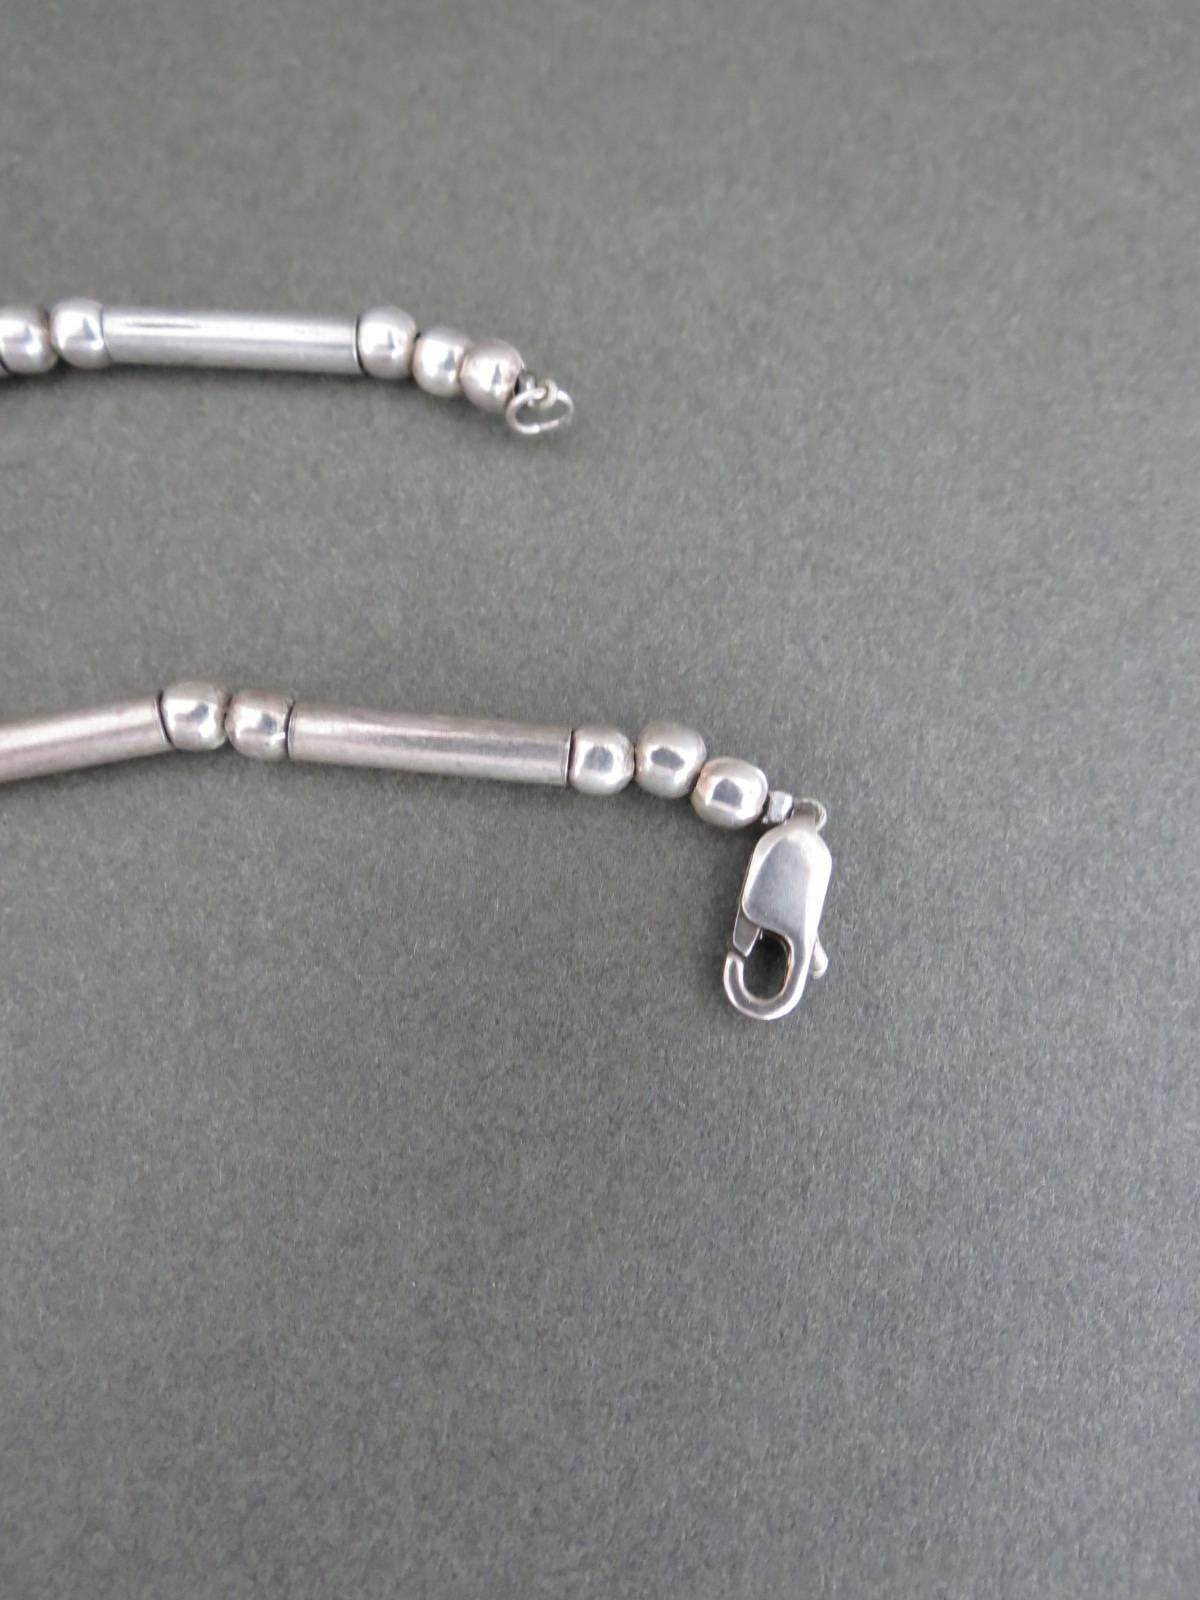 Vintage Sterling Silver Danish Link Necklace. Some ware and hallmarked.
Item Specifics
Length: 46cm (approx 18.00